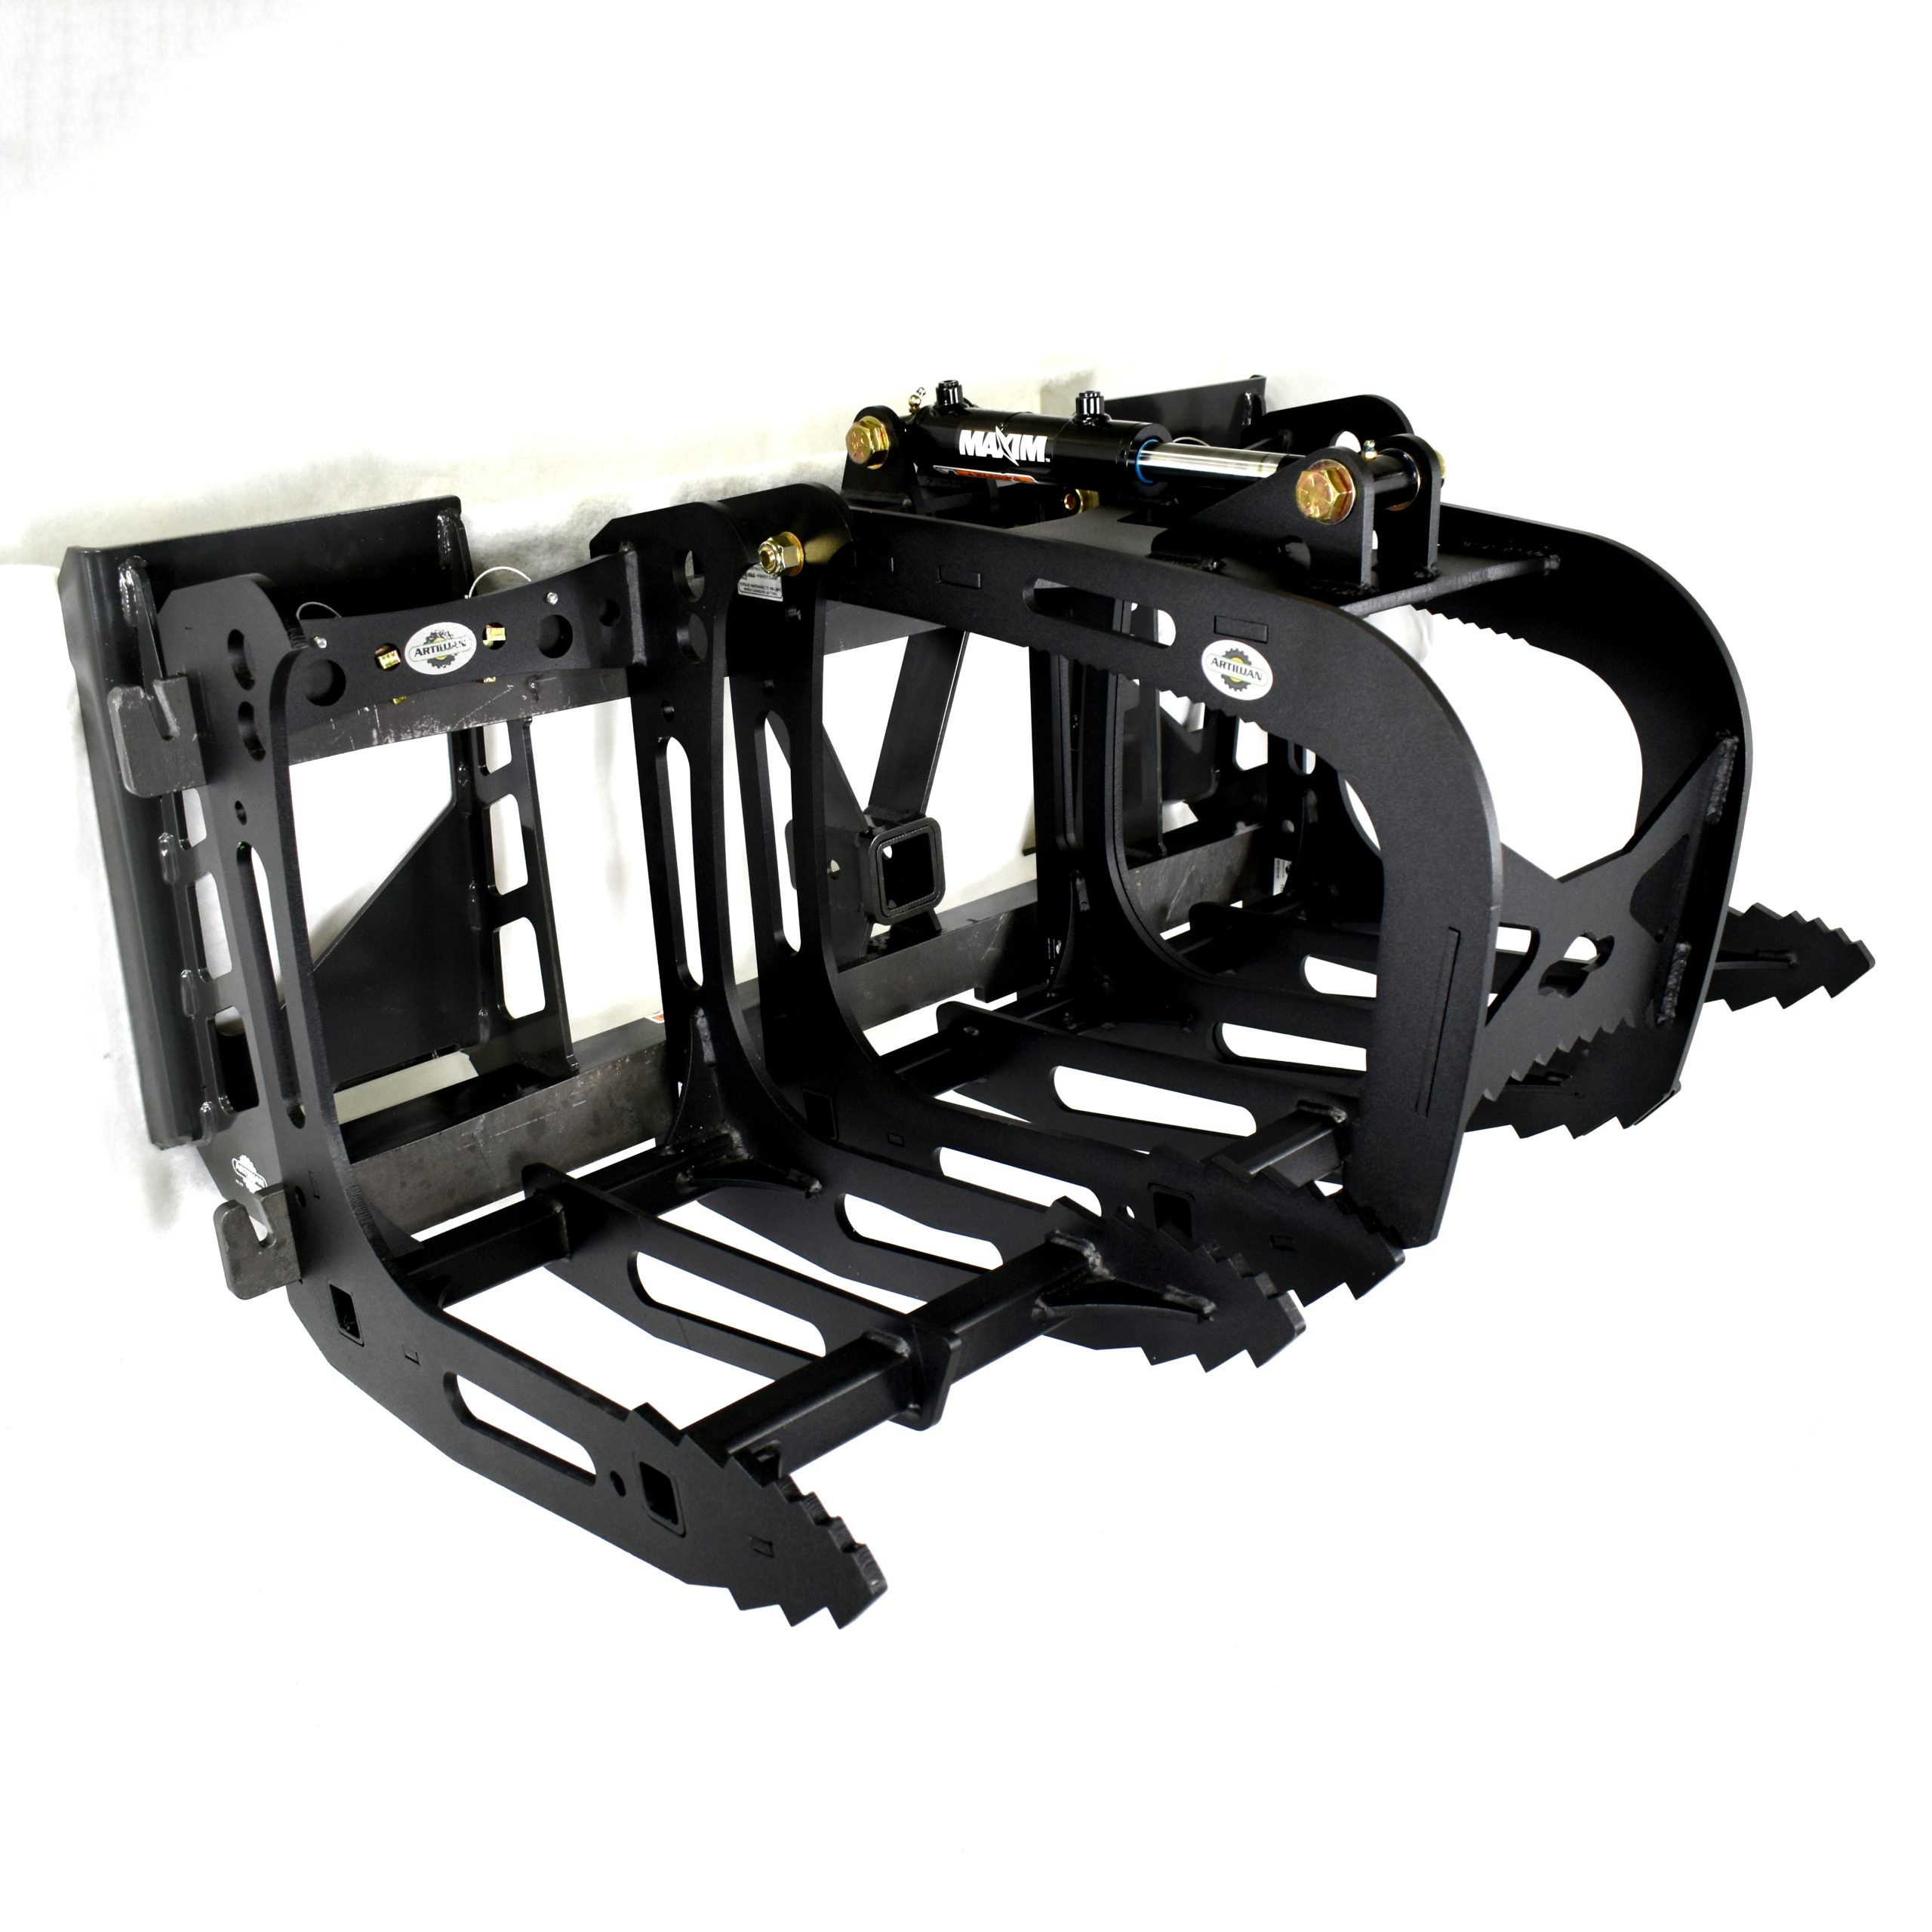 3000 Lb. Skid Steer Quick Attach Frame with 1 Original Sectional Grapple and 2 Rakes